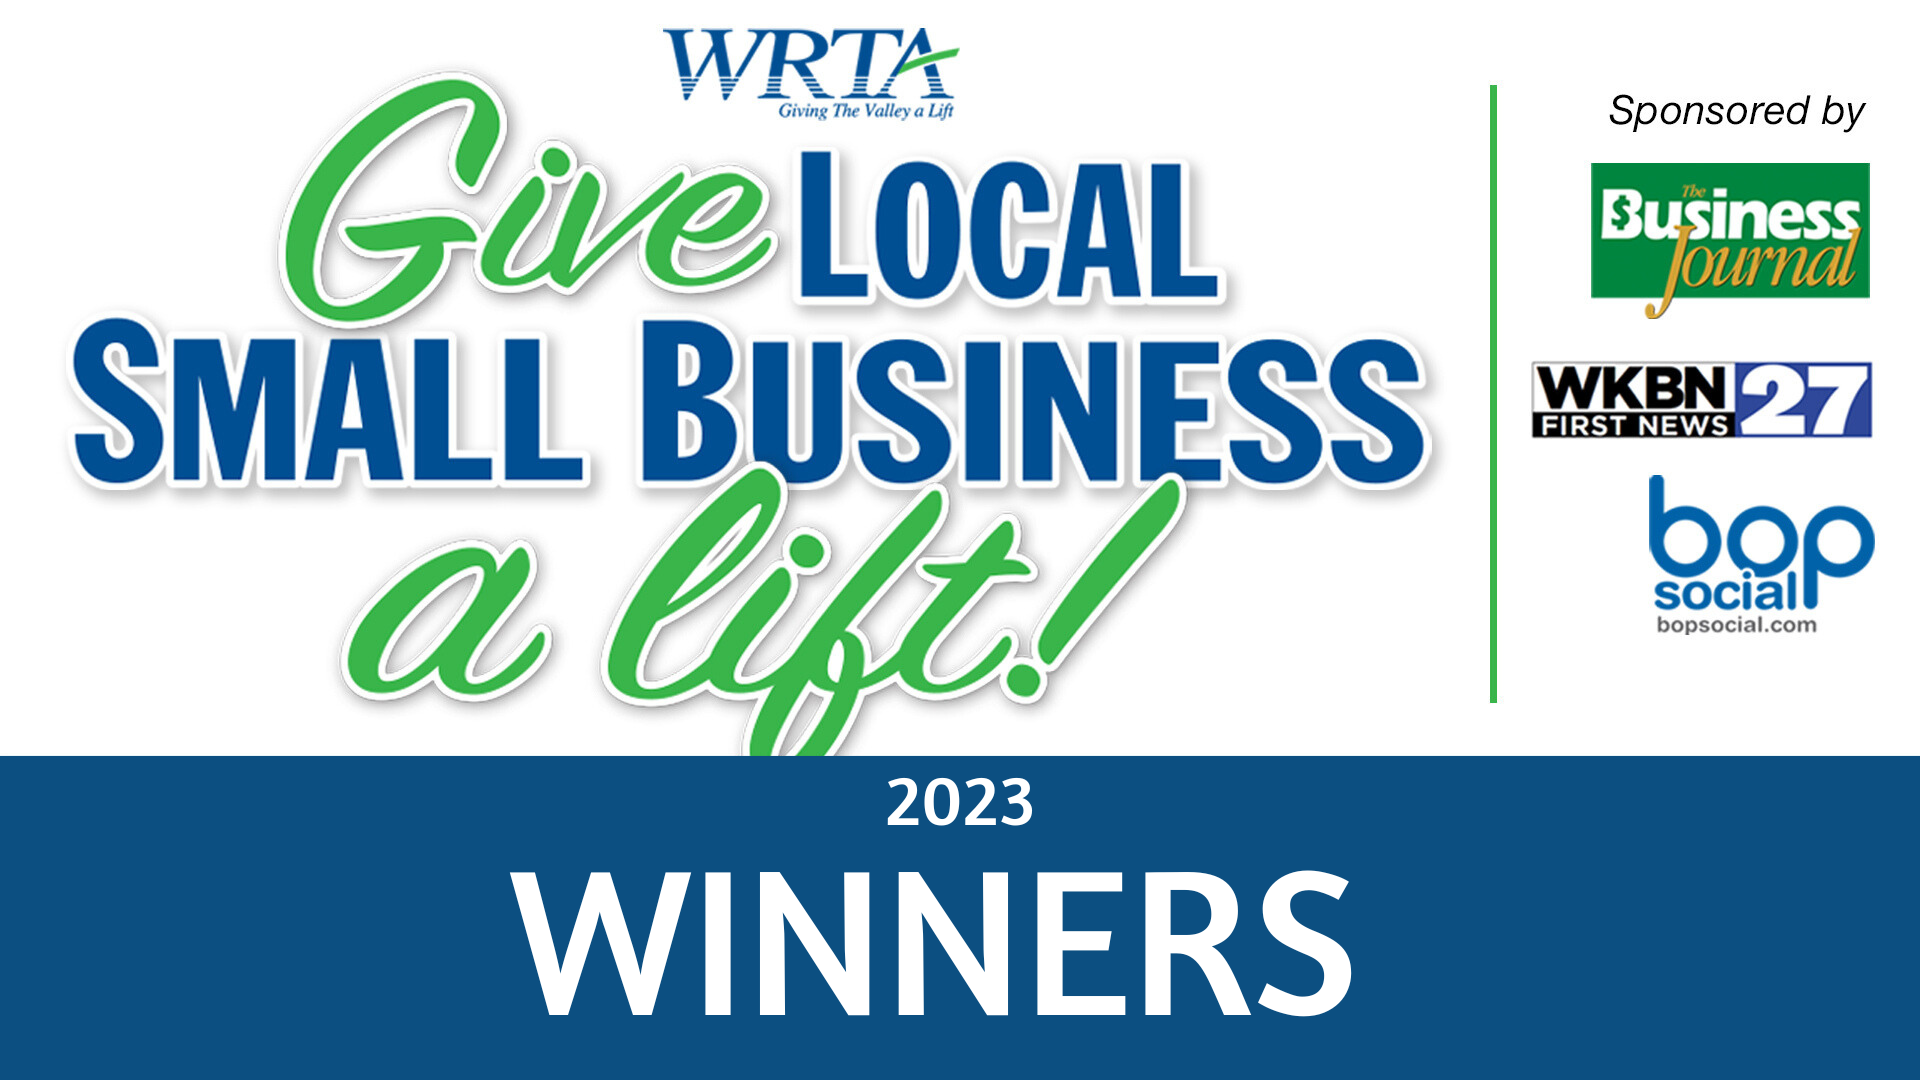 Give Local Small Business a Lift 2023 Winners